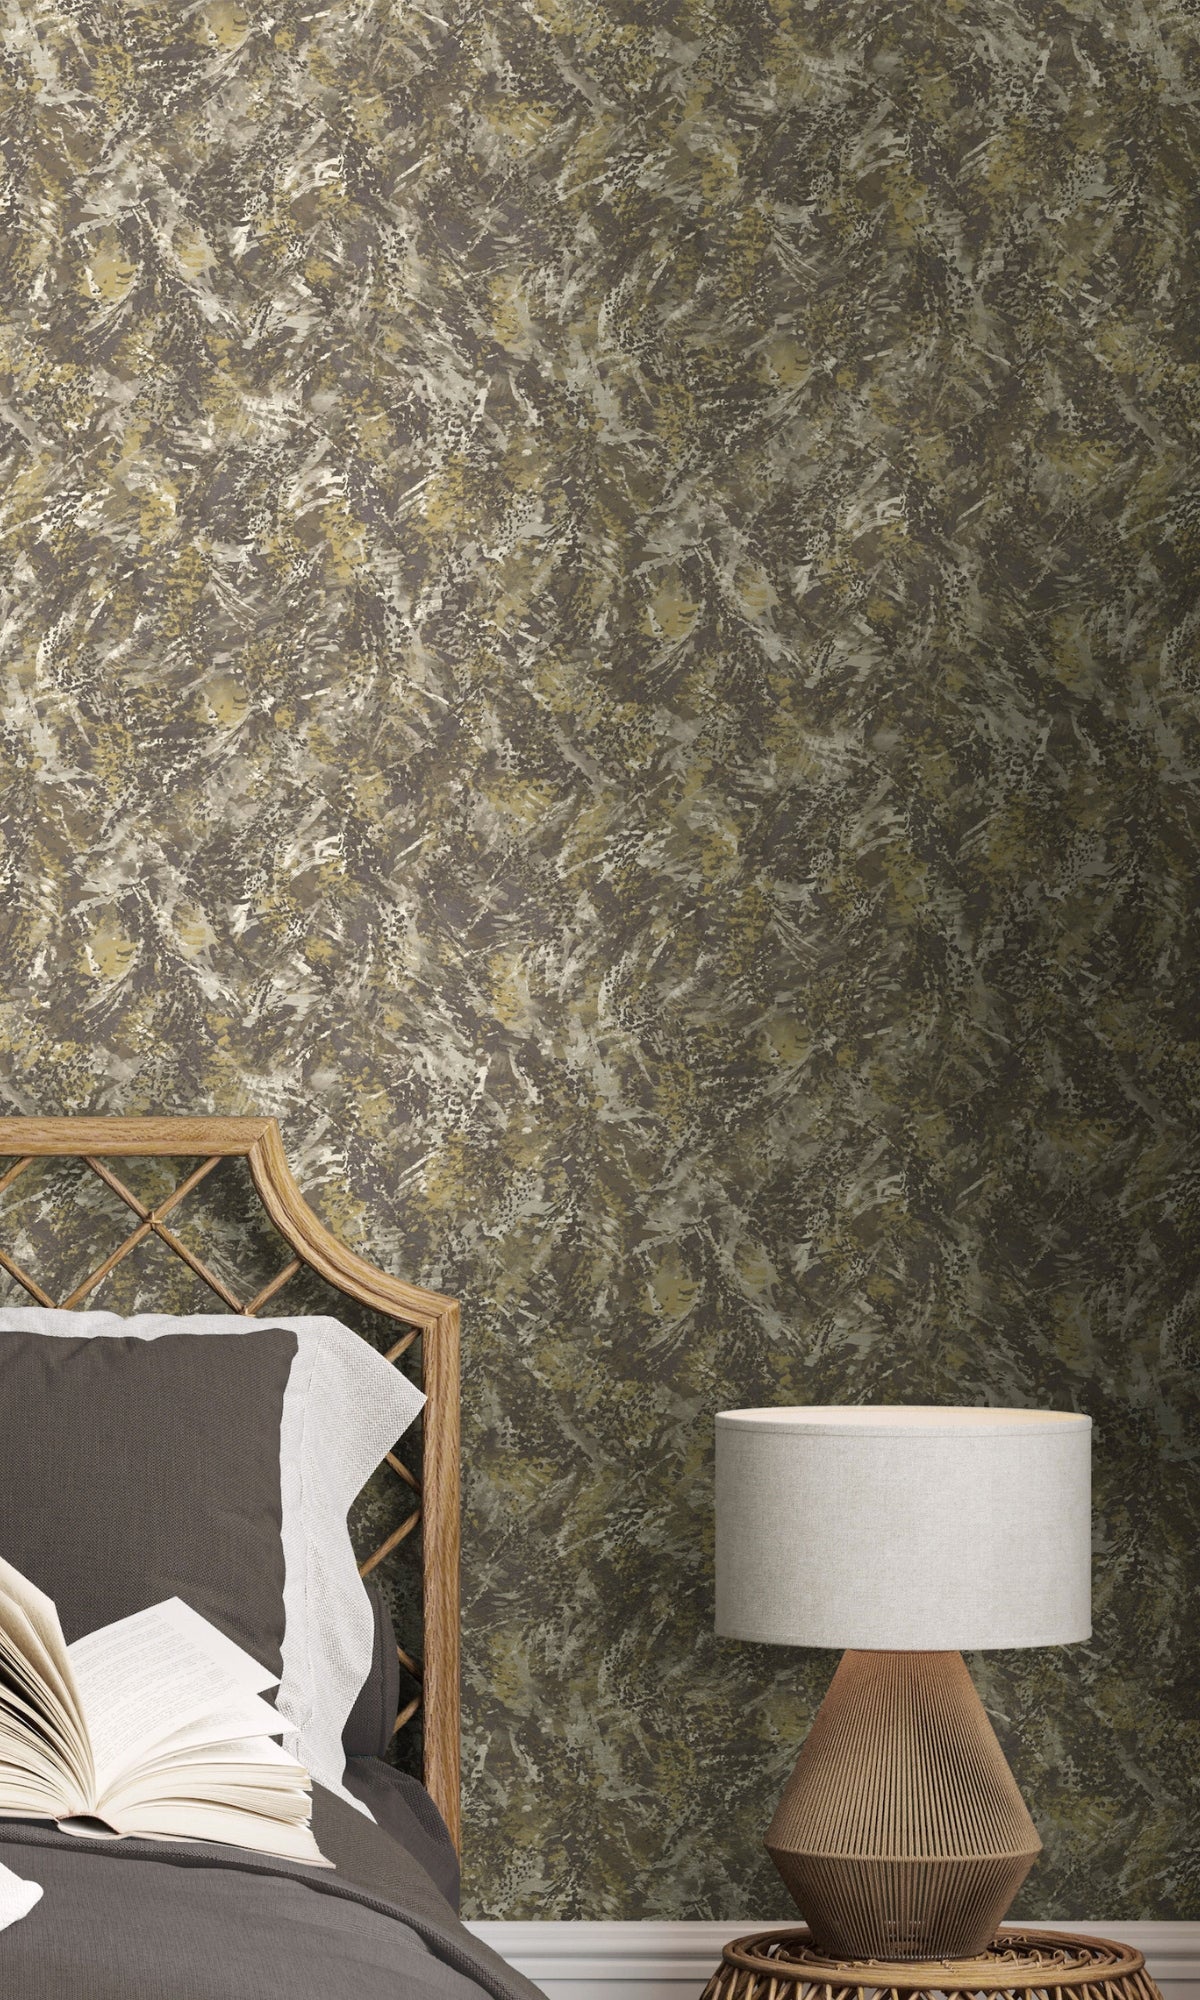 Chocolate Gold Feather Like Textured Abstract Wallpaper R8940